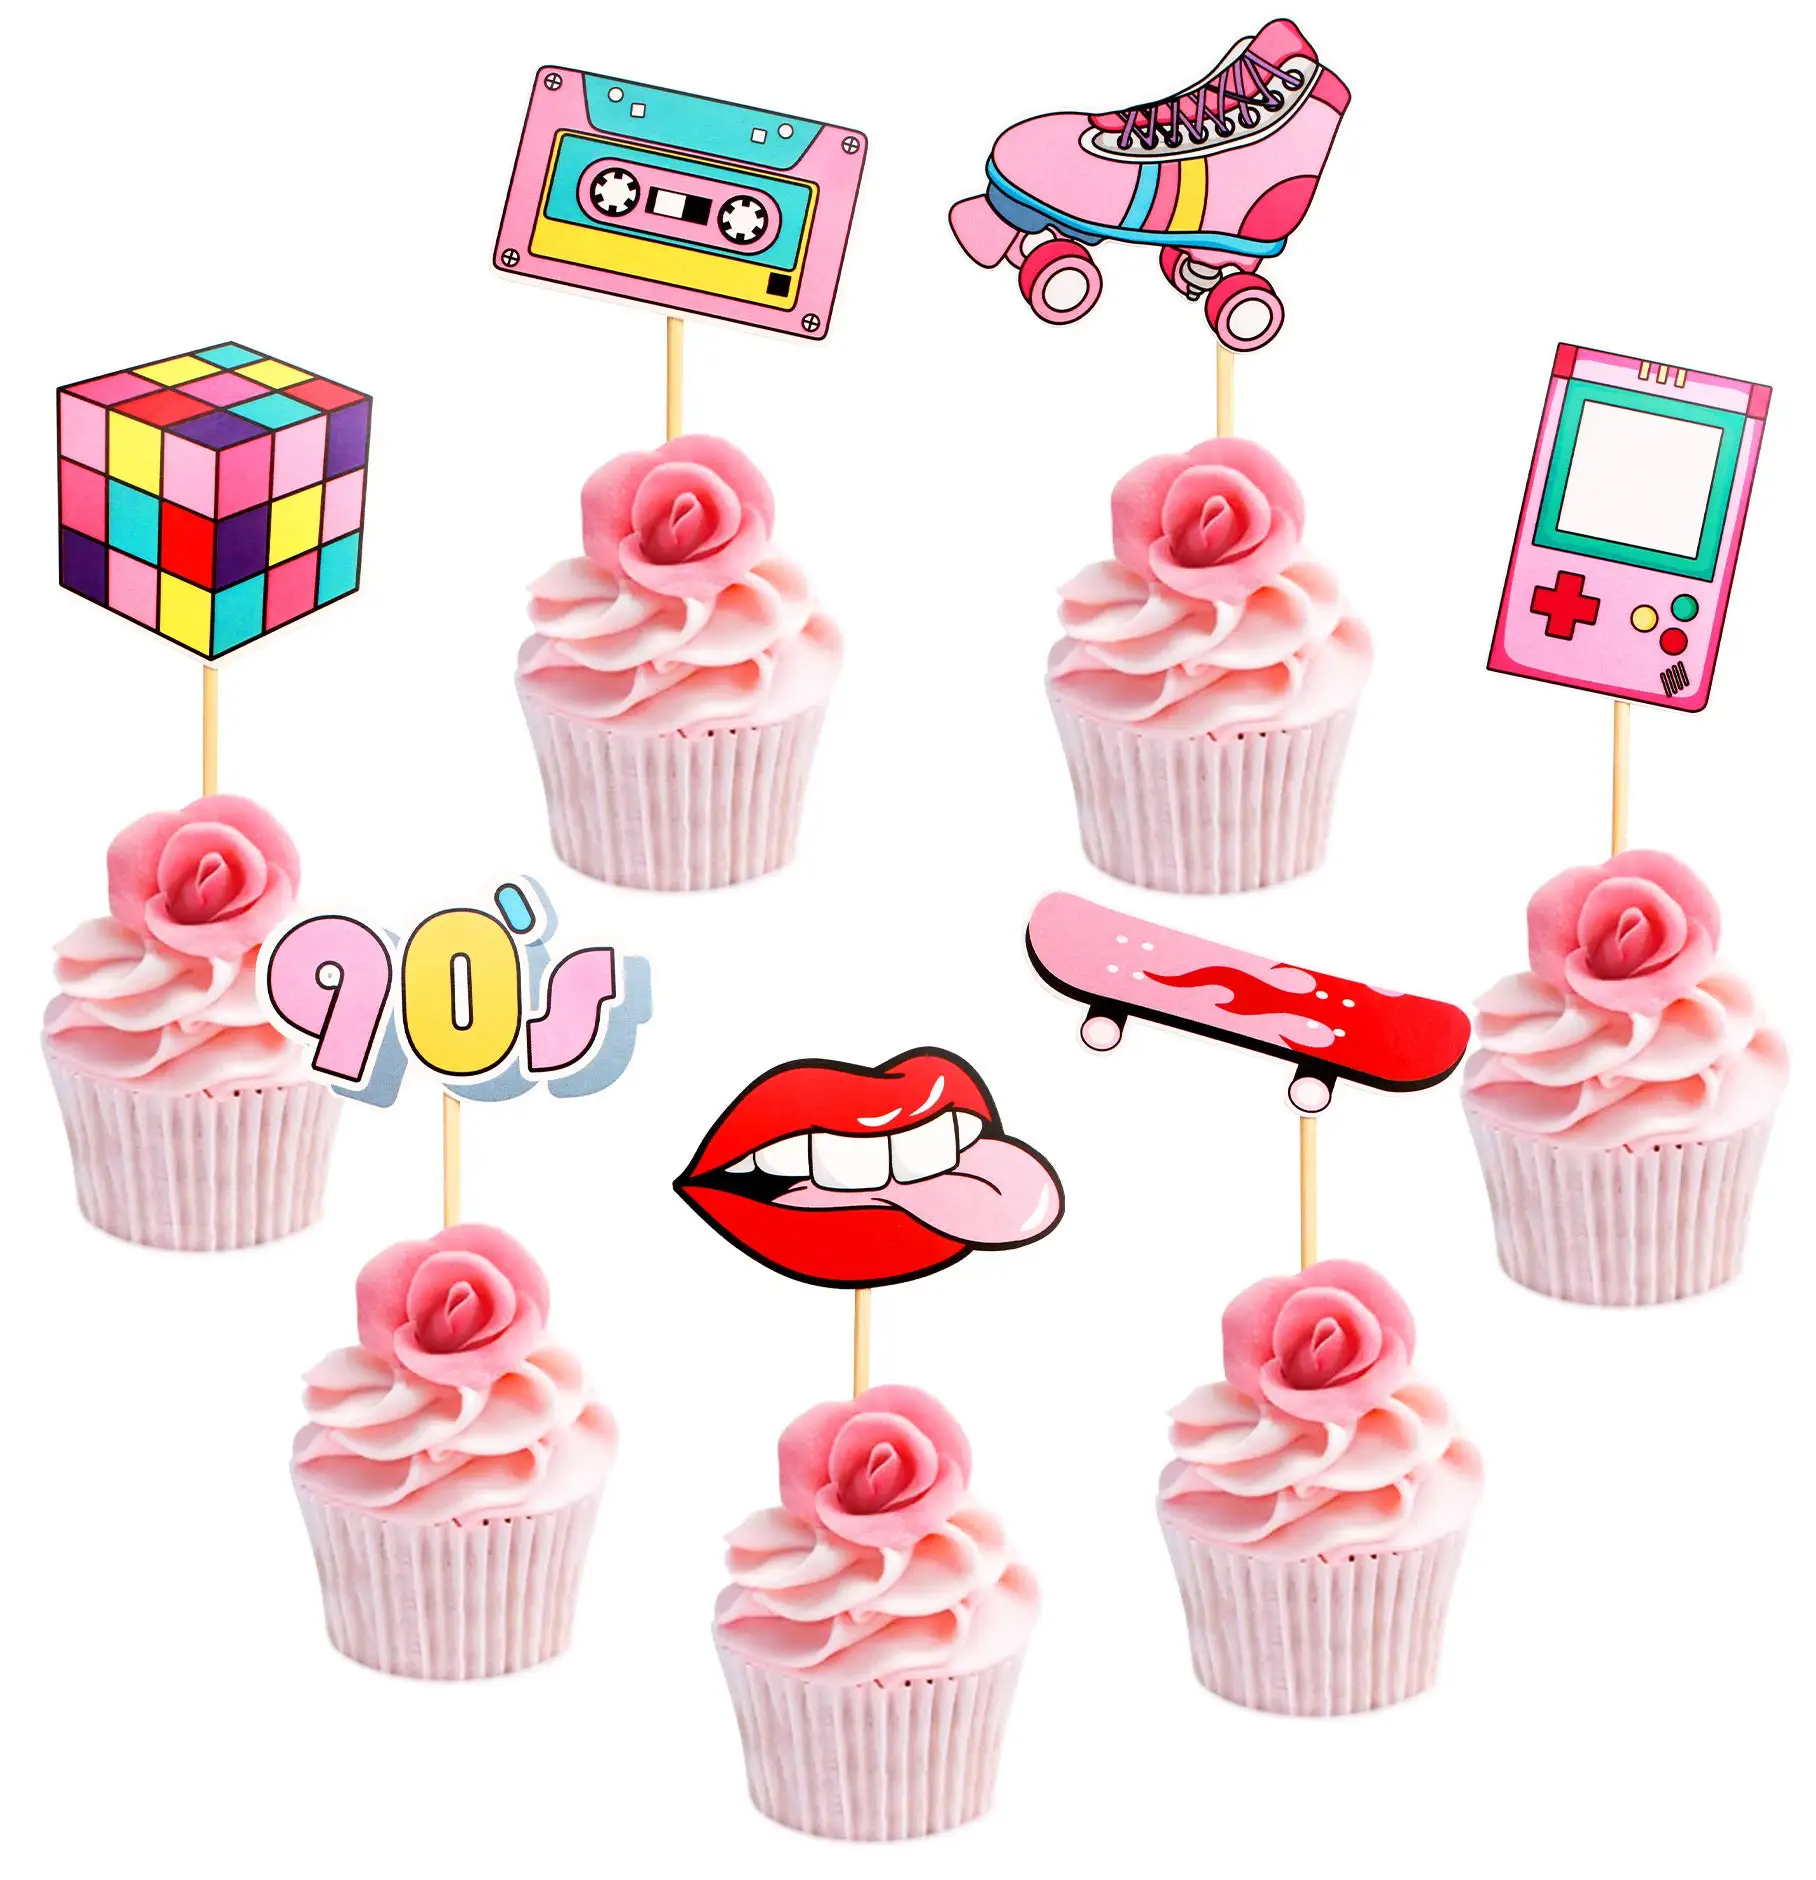 21Pcs 80s 90s Themed Cupcake Toppers Dessert Cupcake Toppers Birthday Supplies Throwback Party Favors Decorations 1set lot super hero themehappy birthday party supplies baby shower boys favors cake picks decoration diy cupcake toppers